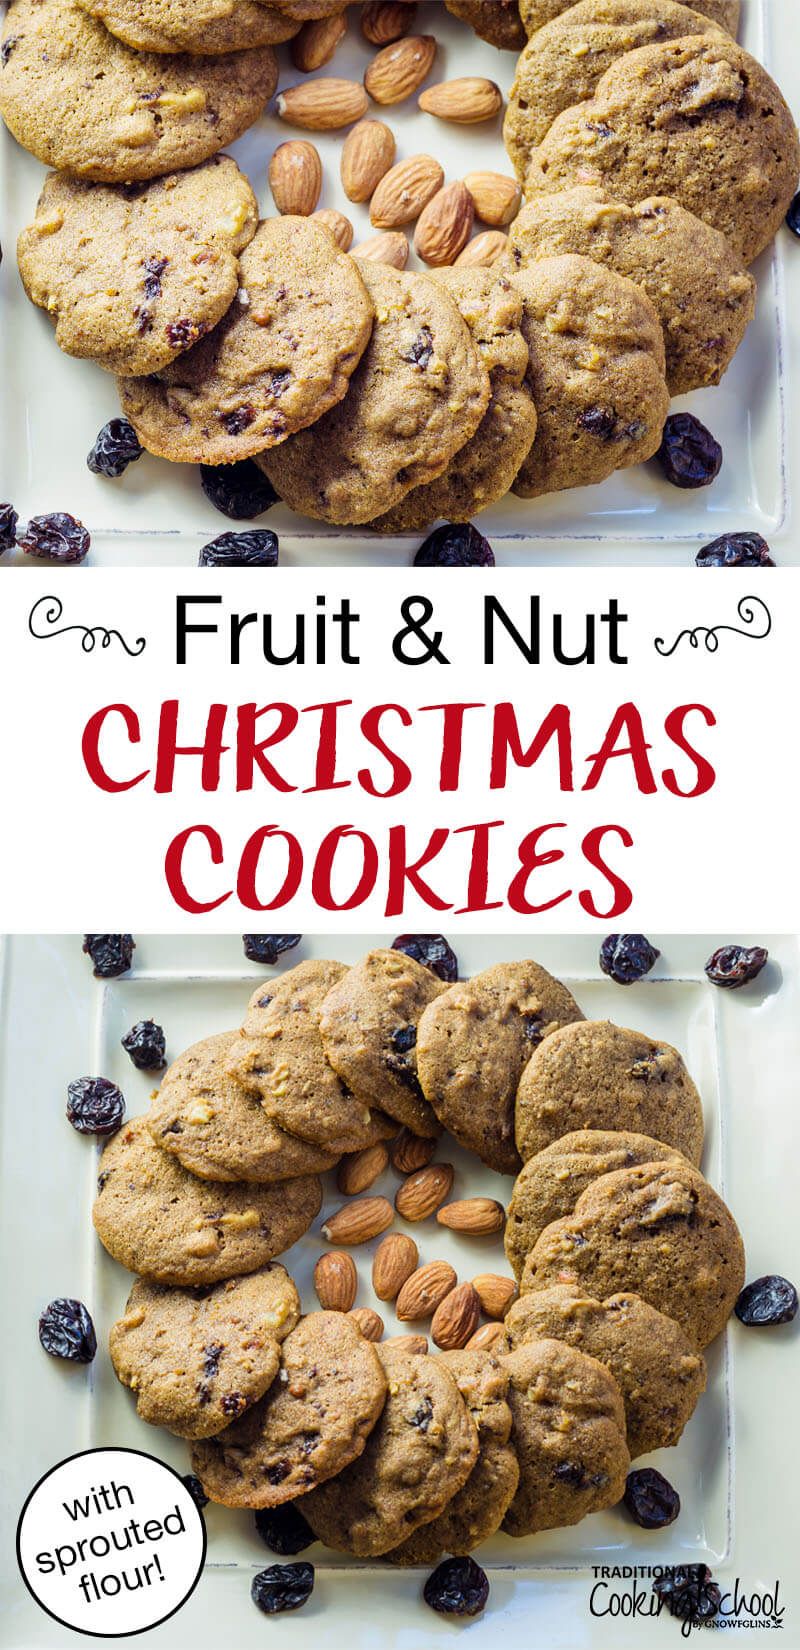 Fruit and nut Christmas cookies with almonds and raisins close up